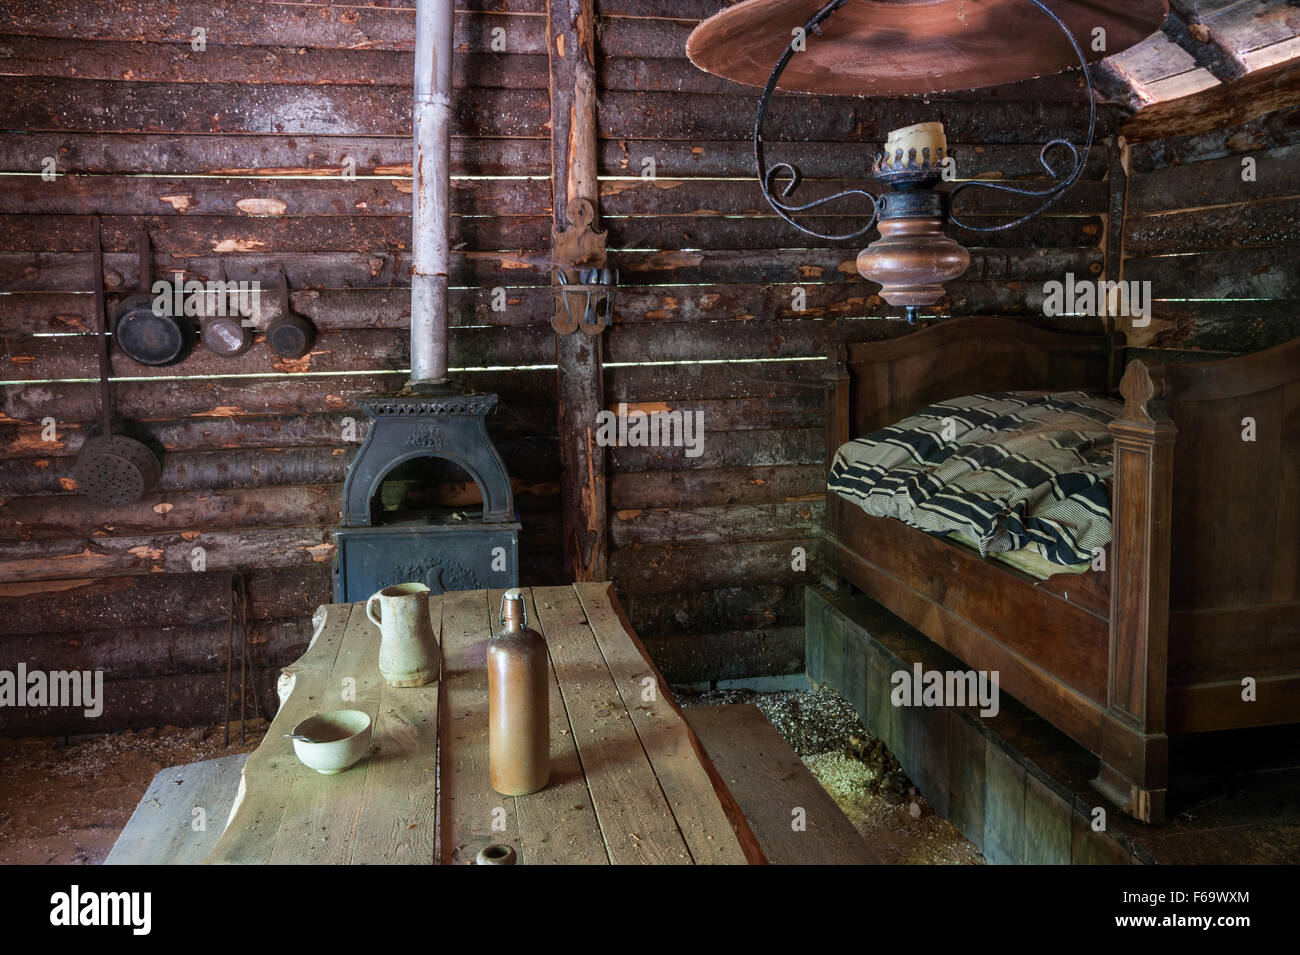 Rustic log cabin interior with wooden furniture Stock Photo